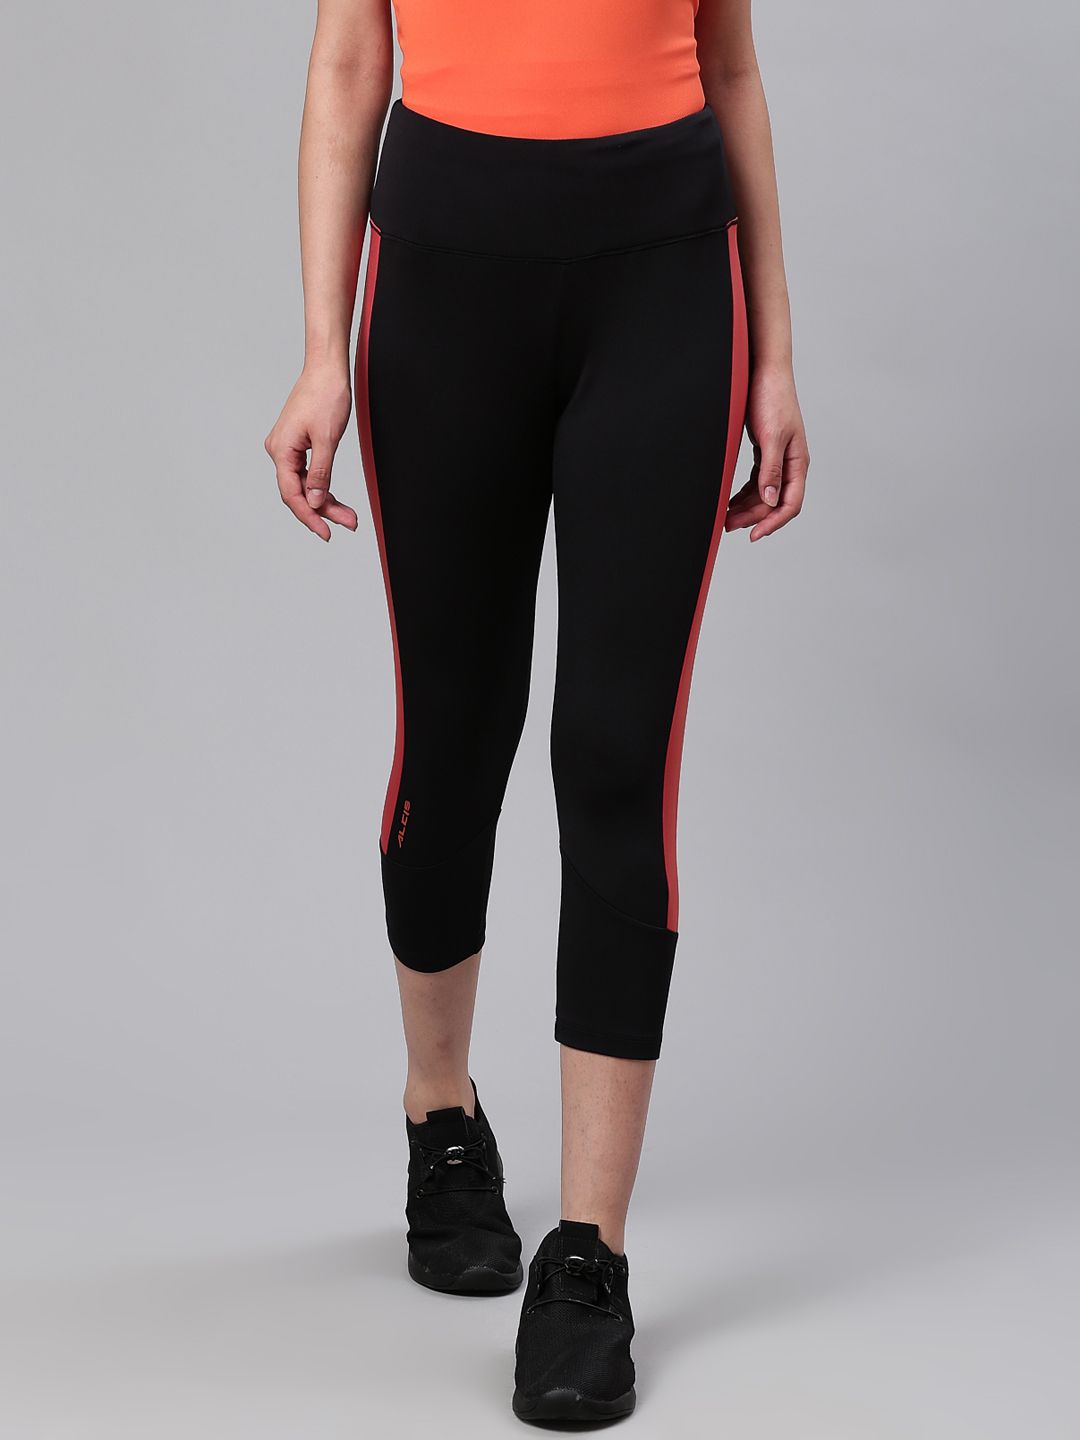 Alcis Women Black Solid Training Tights Price in India